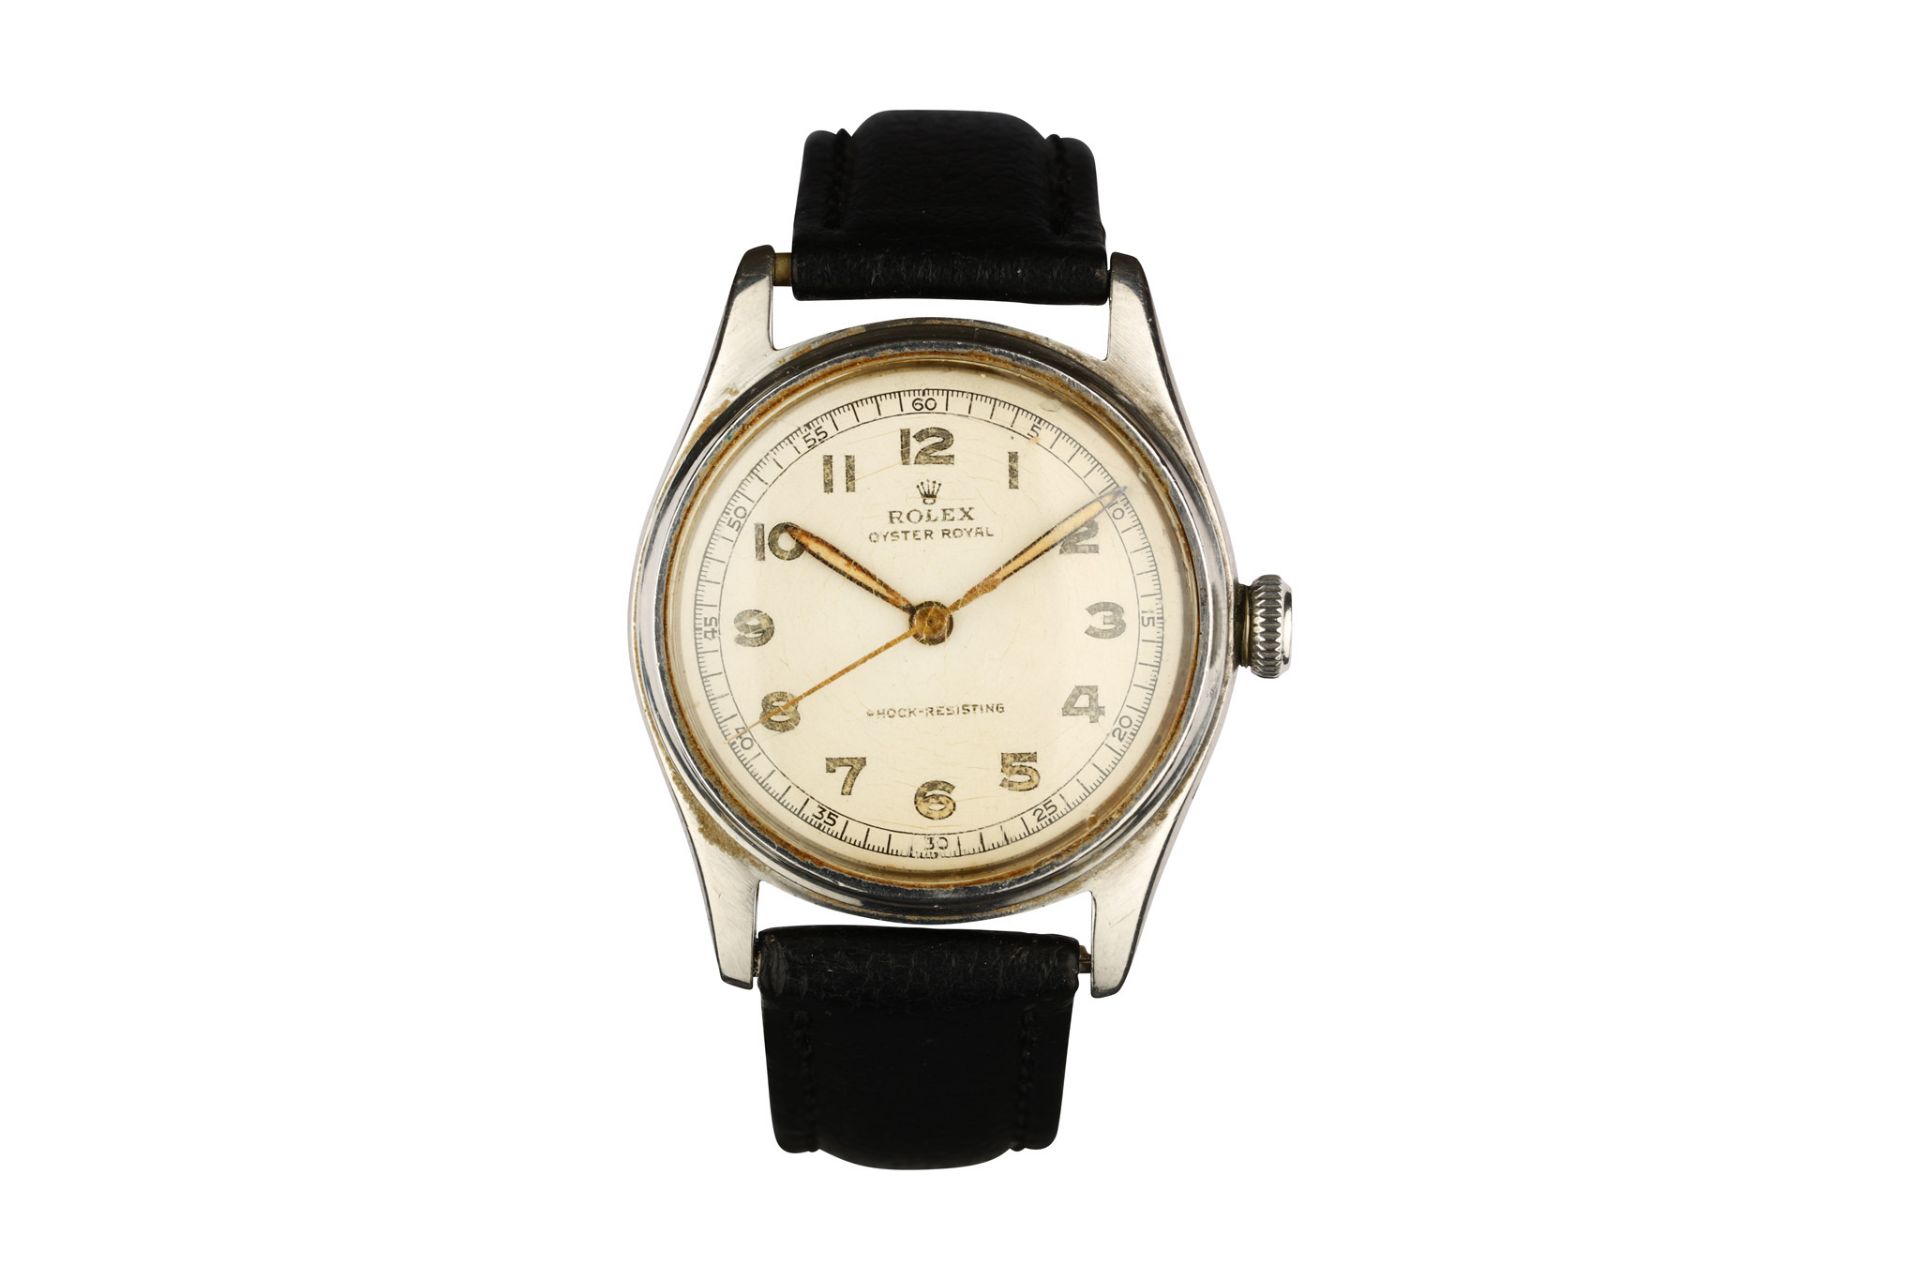 Rolex. A stainless steel manual wind wristwatch. Model: Oyster Royal. Reference: 4444. Date: 1947 (